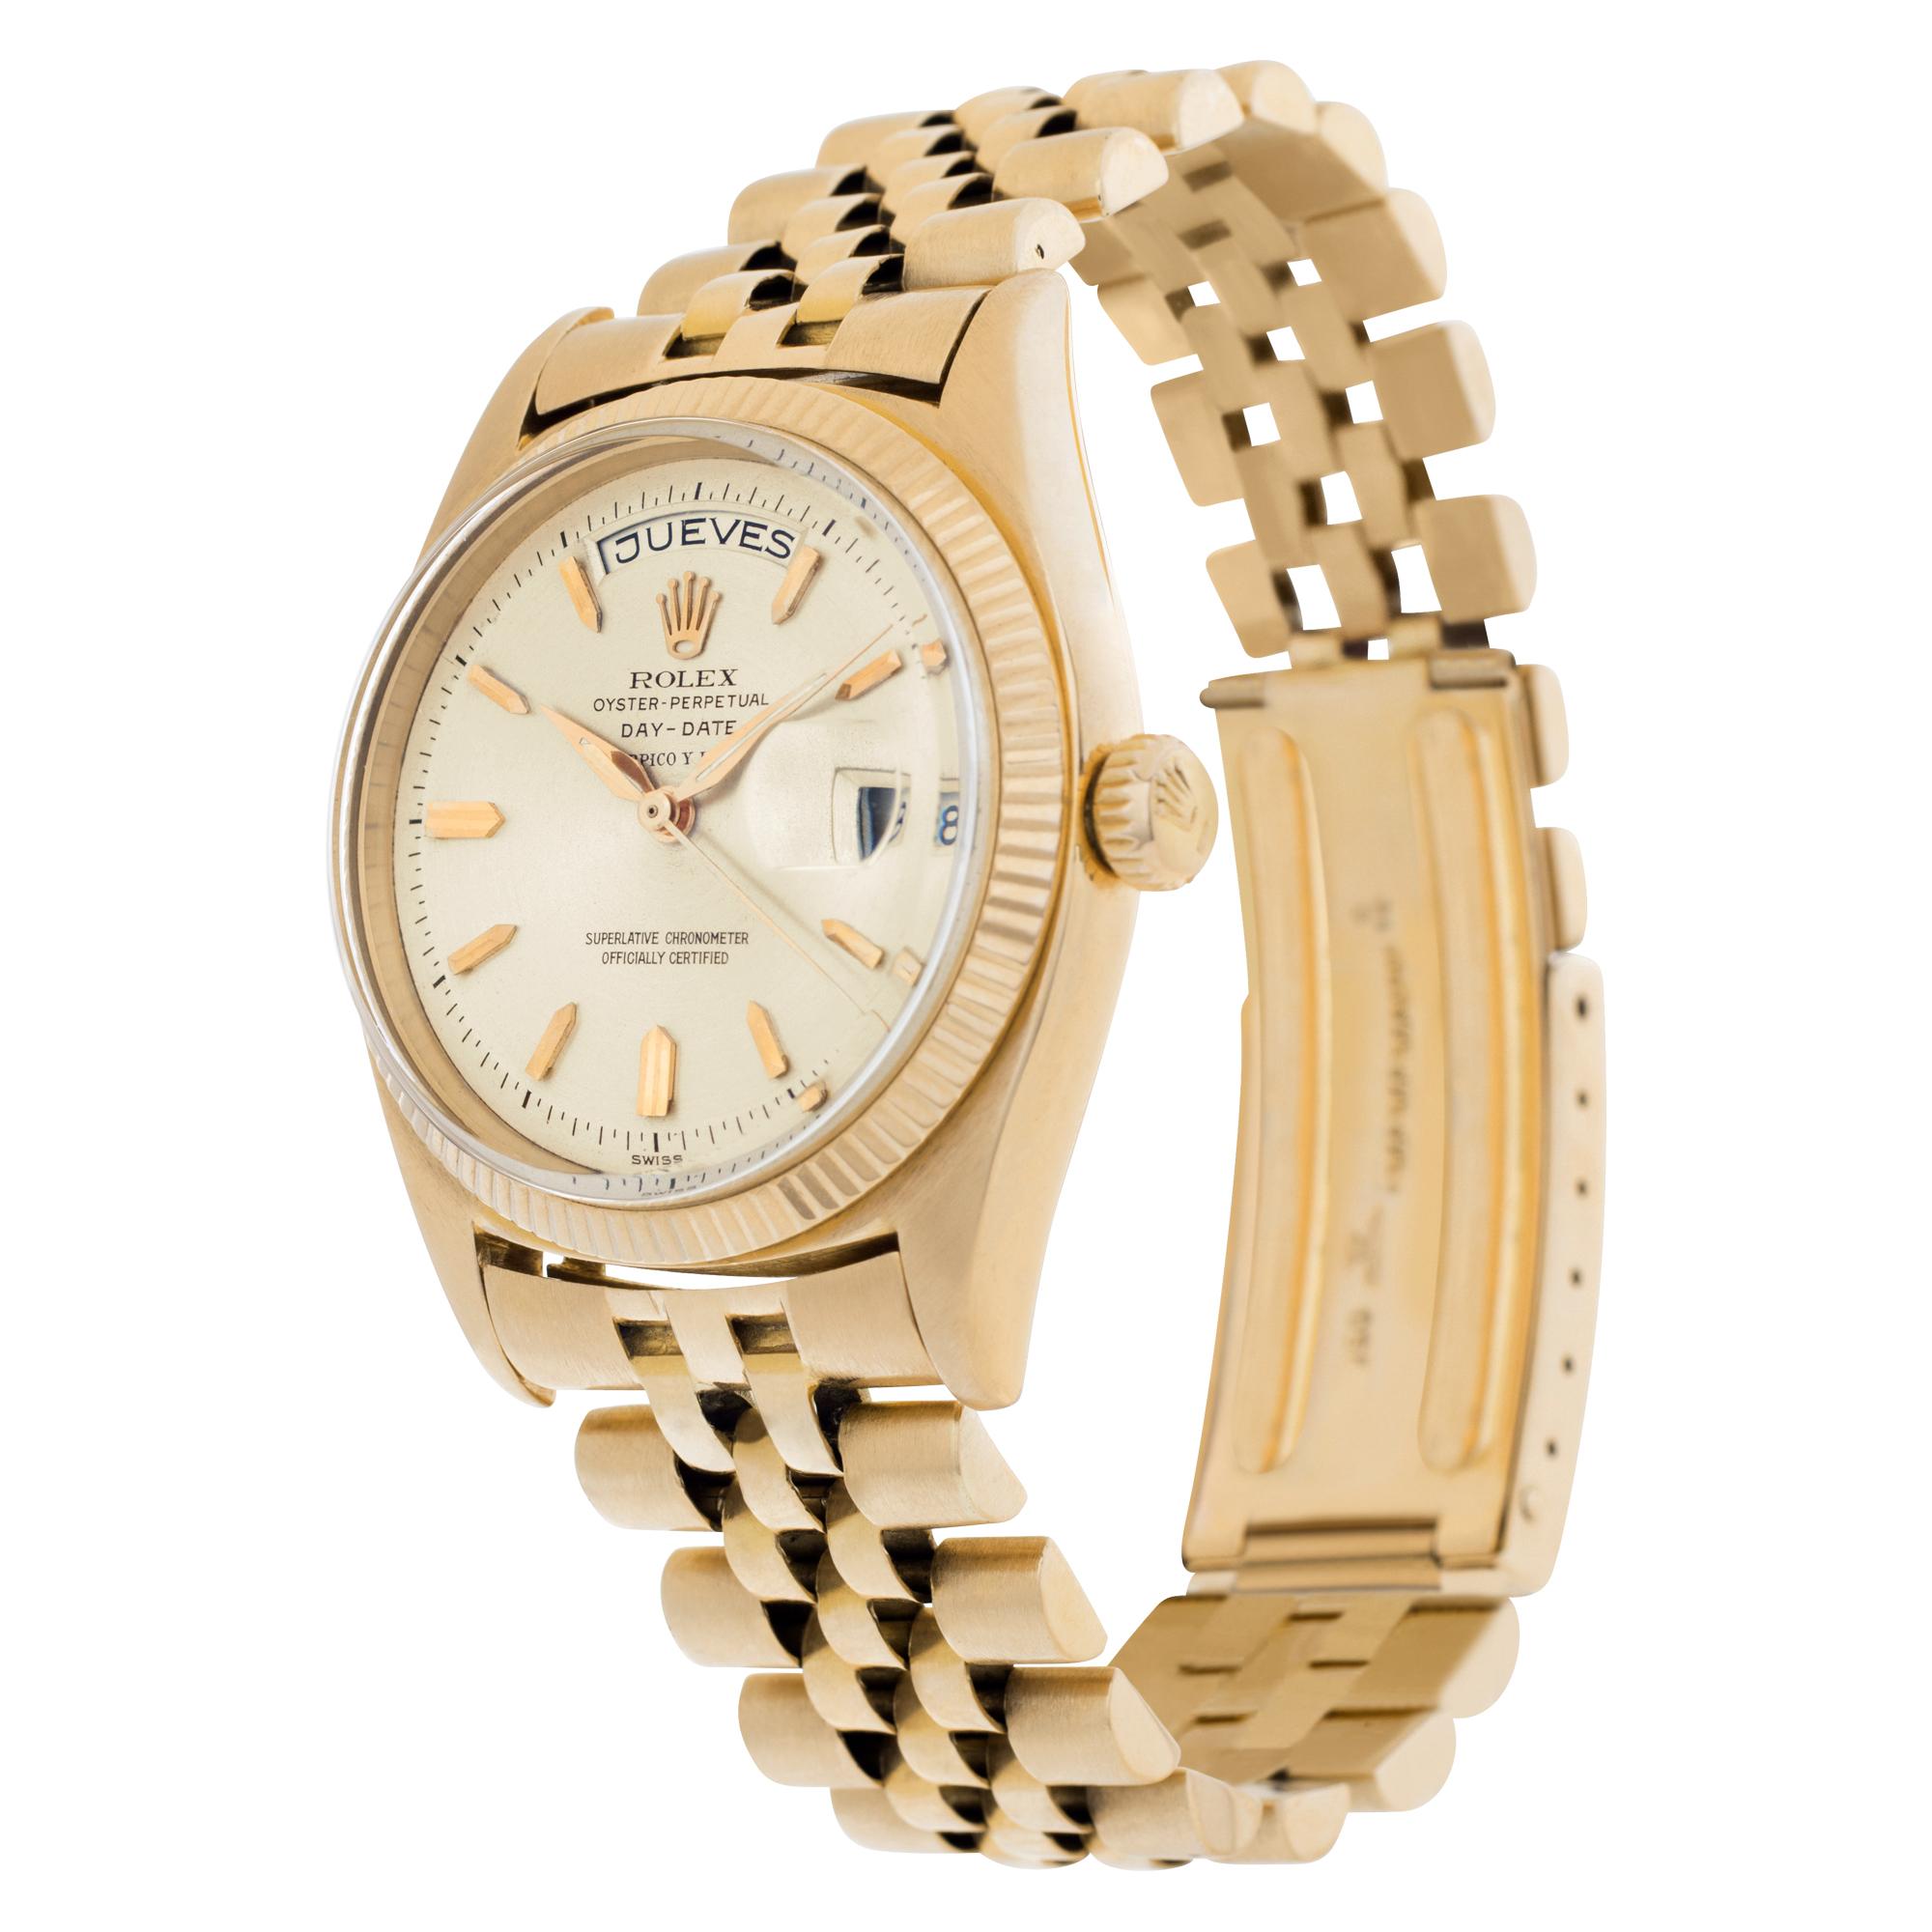 Highly Collectible - Vintage Rolex Day Date in 18k rose gold with original 18k rose gold Jubilee band, original 